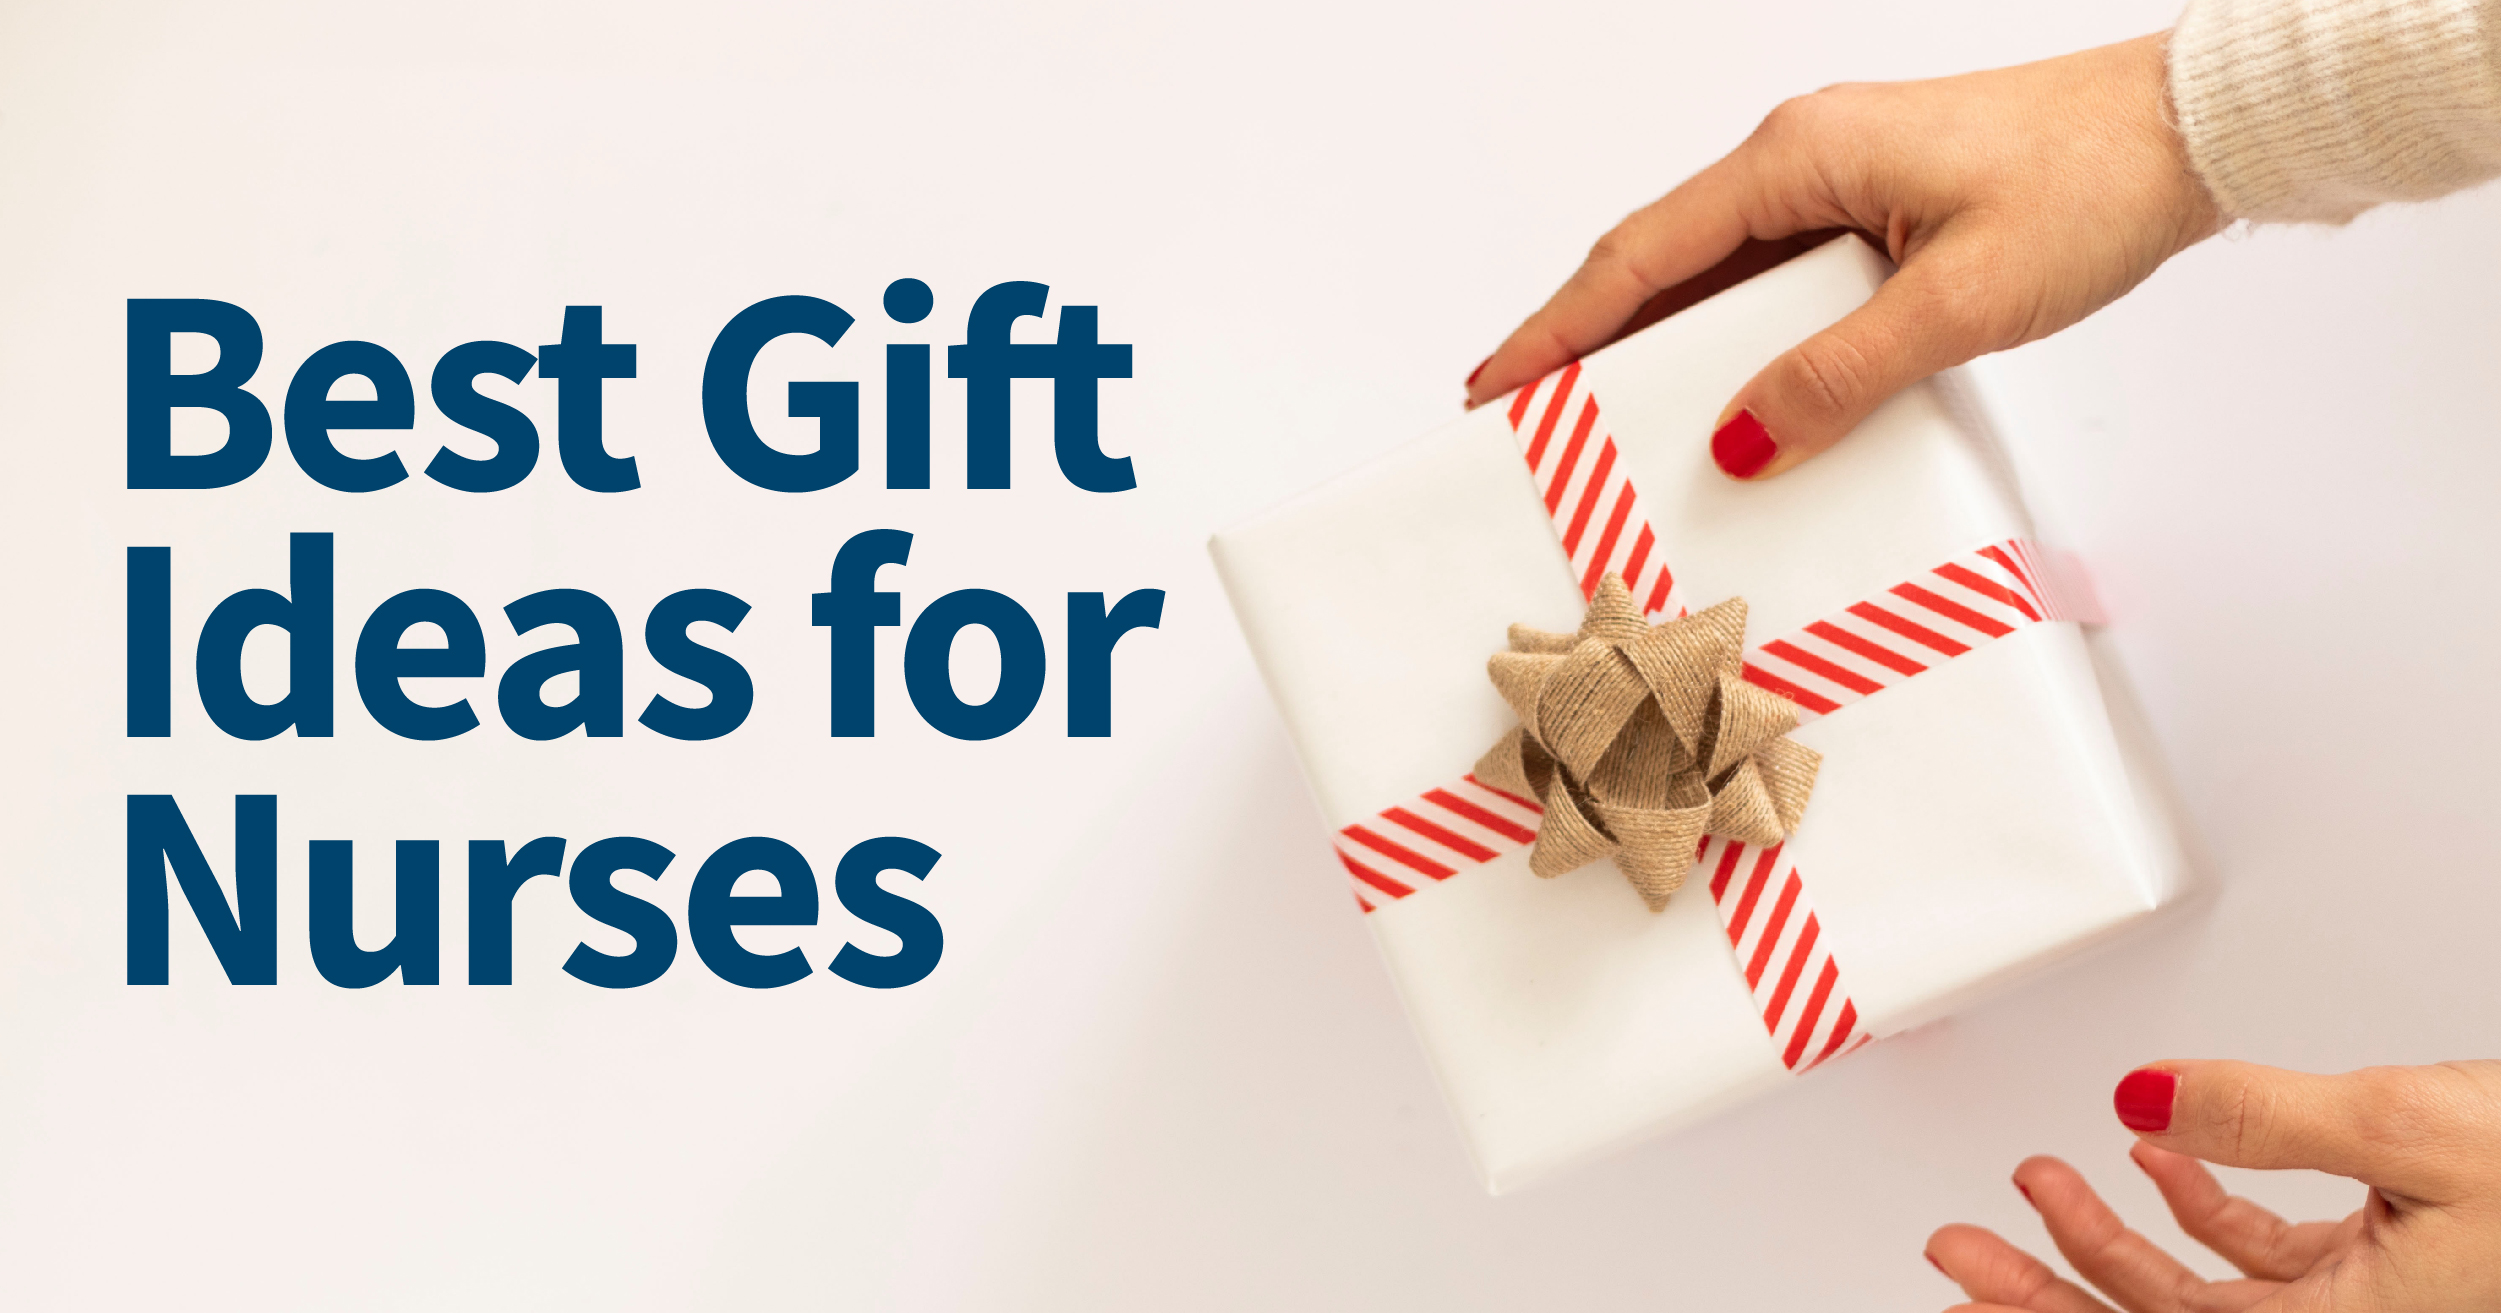 woman's hand holding a gift-wrapped present against white background with blue text overlay 